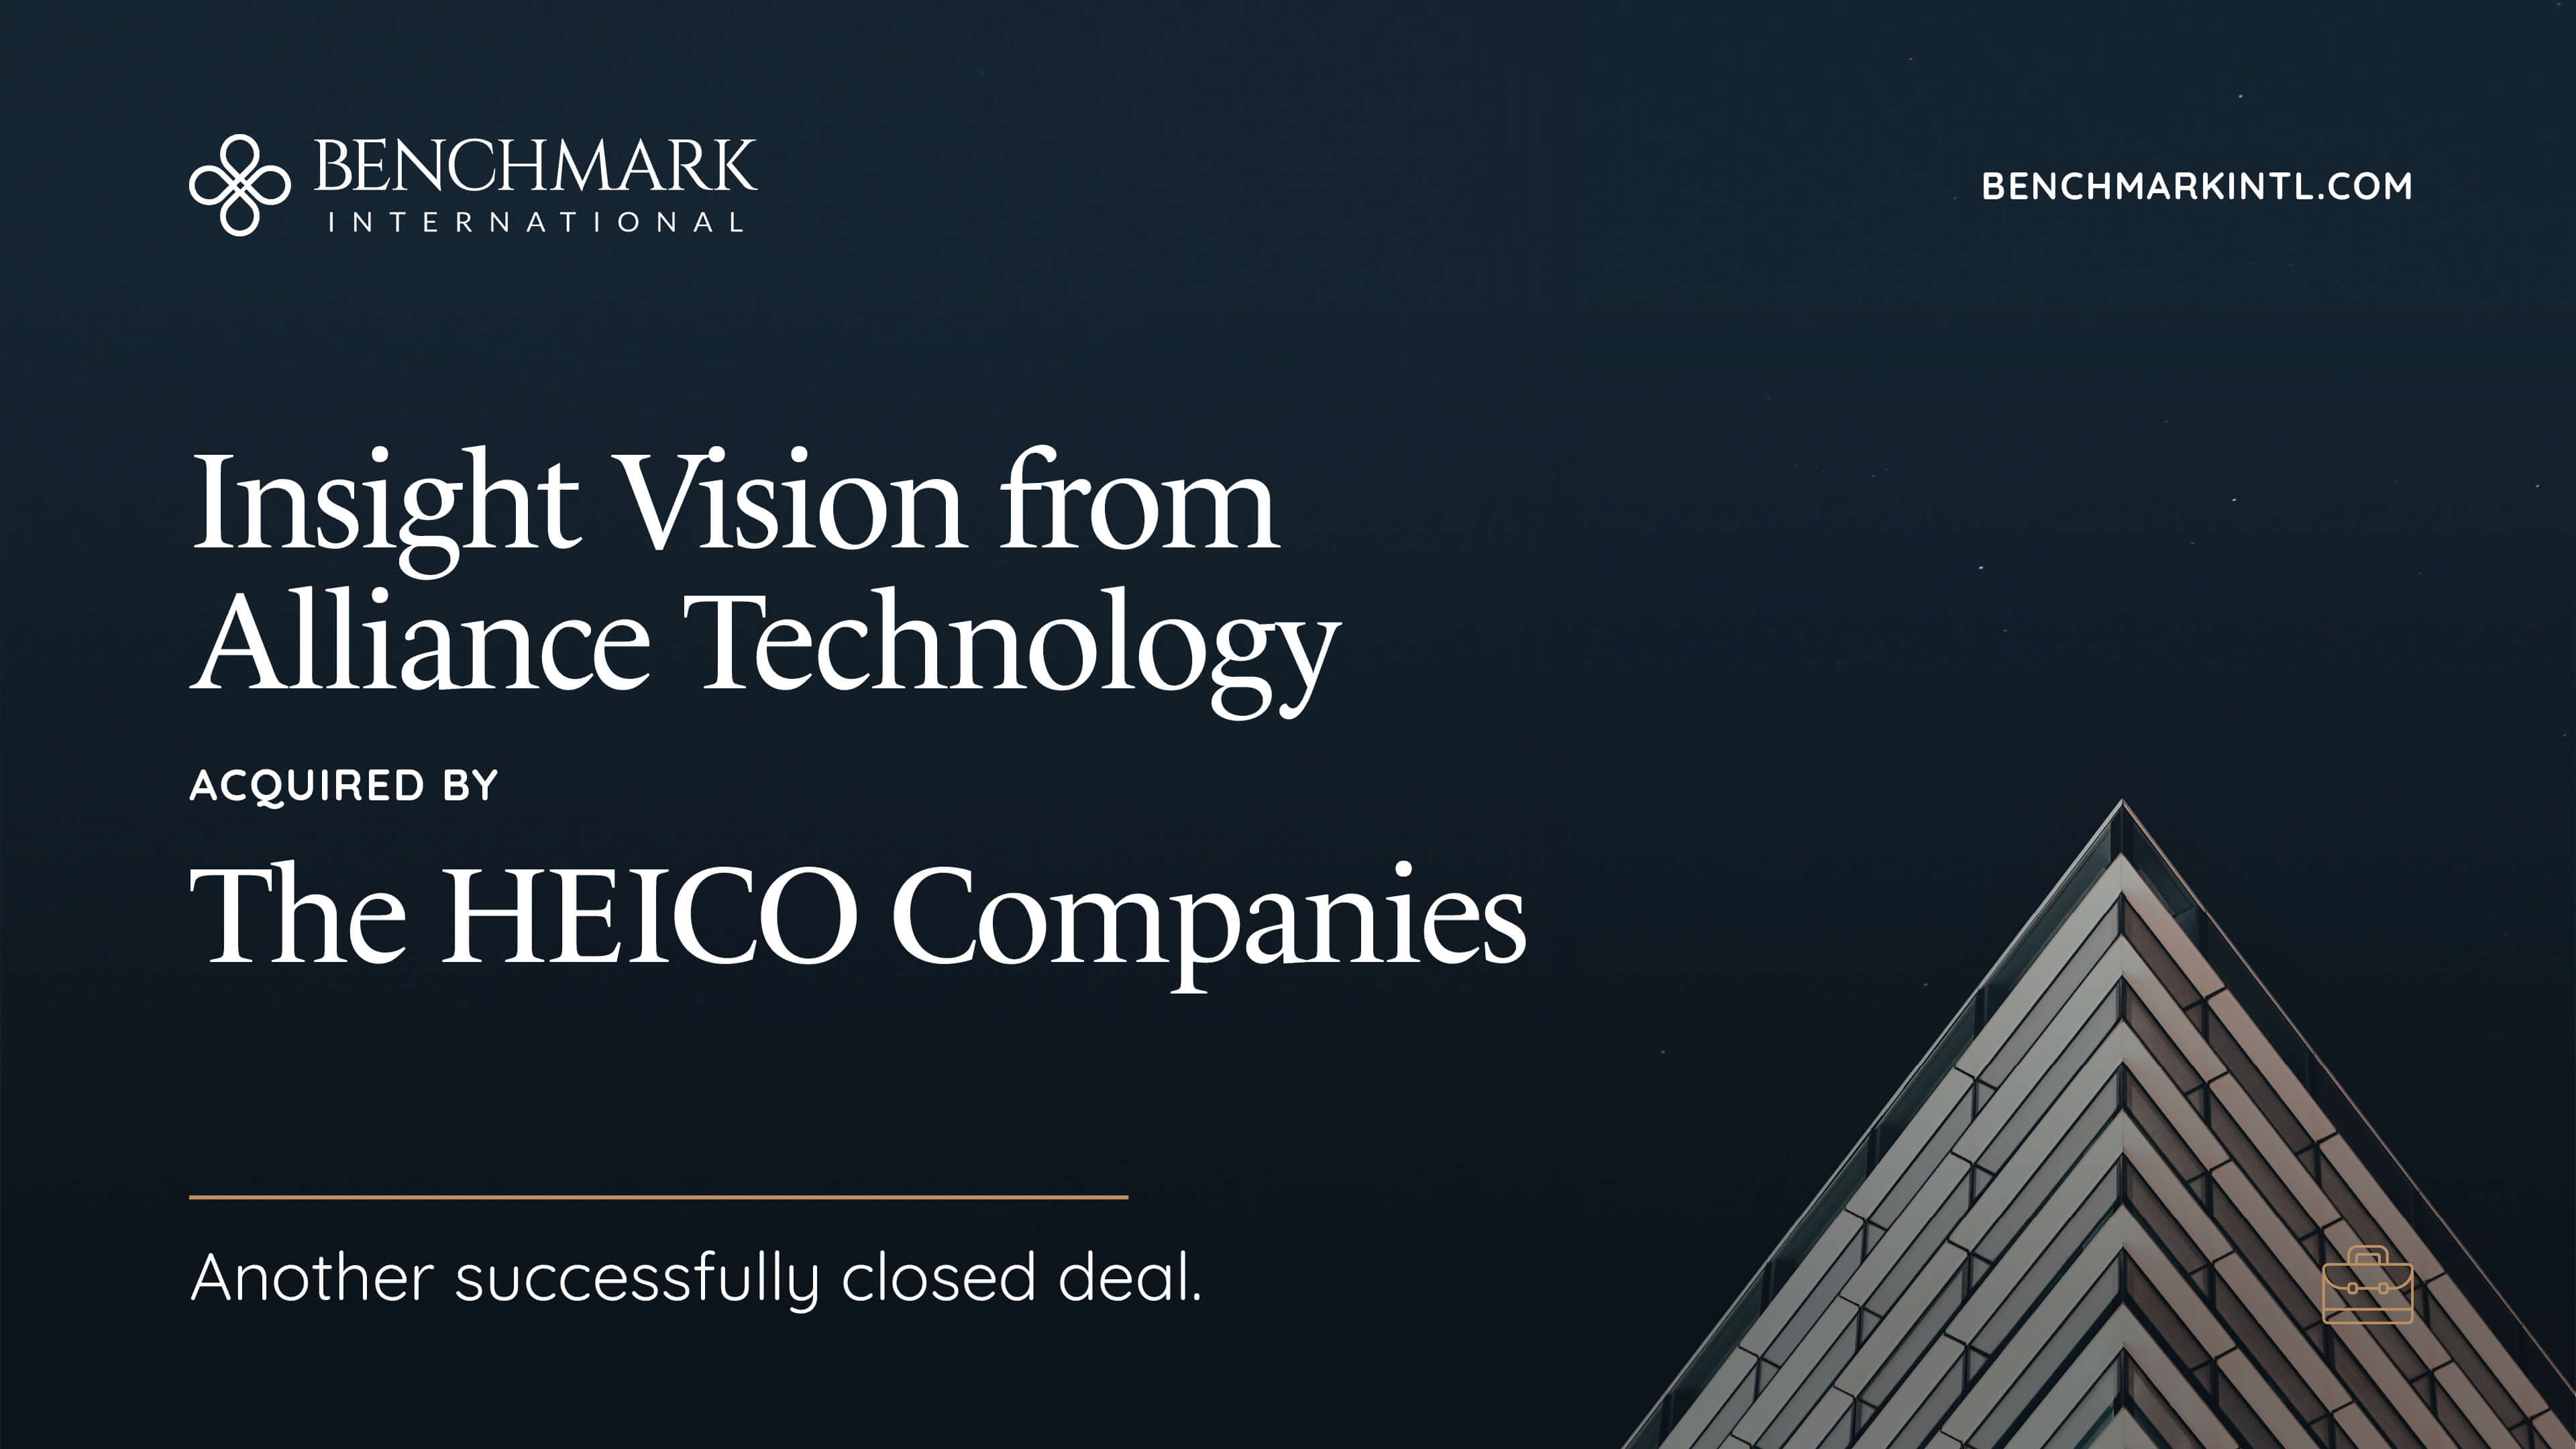 Benchmark International Successfully Facilitated the Transaction Between Insight Vision and The HEICO Companies.